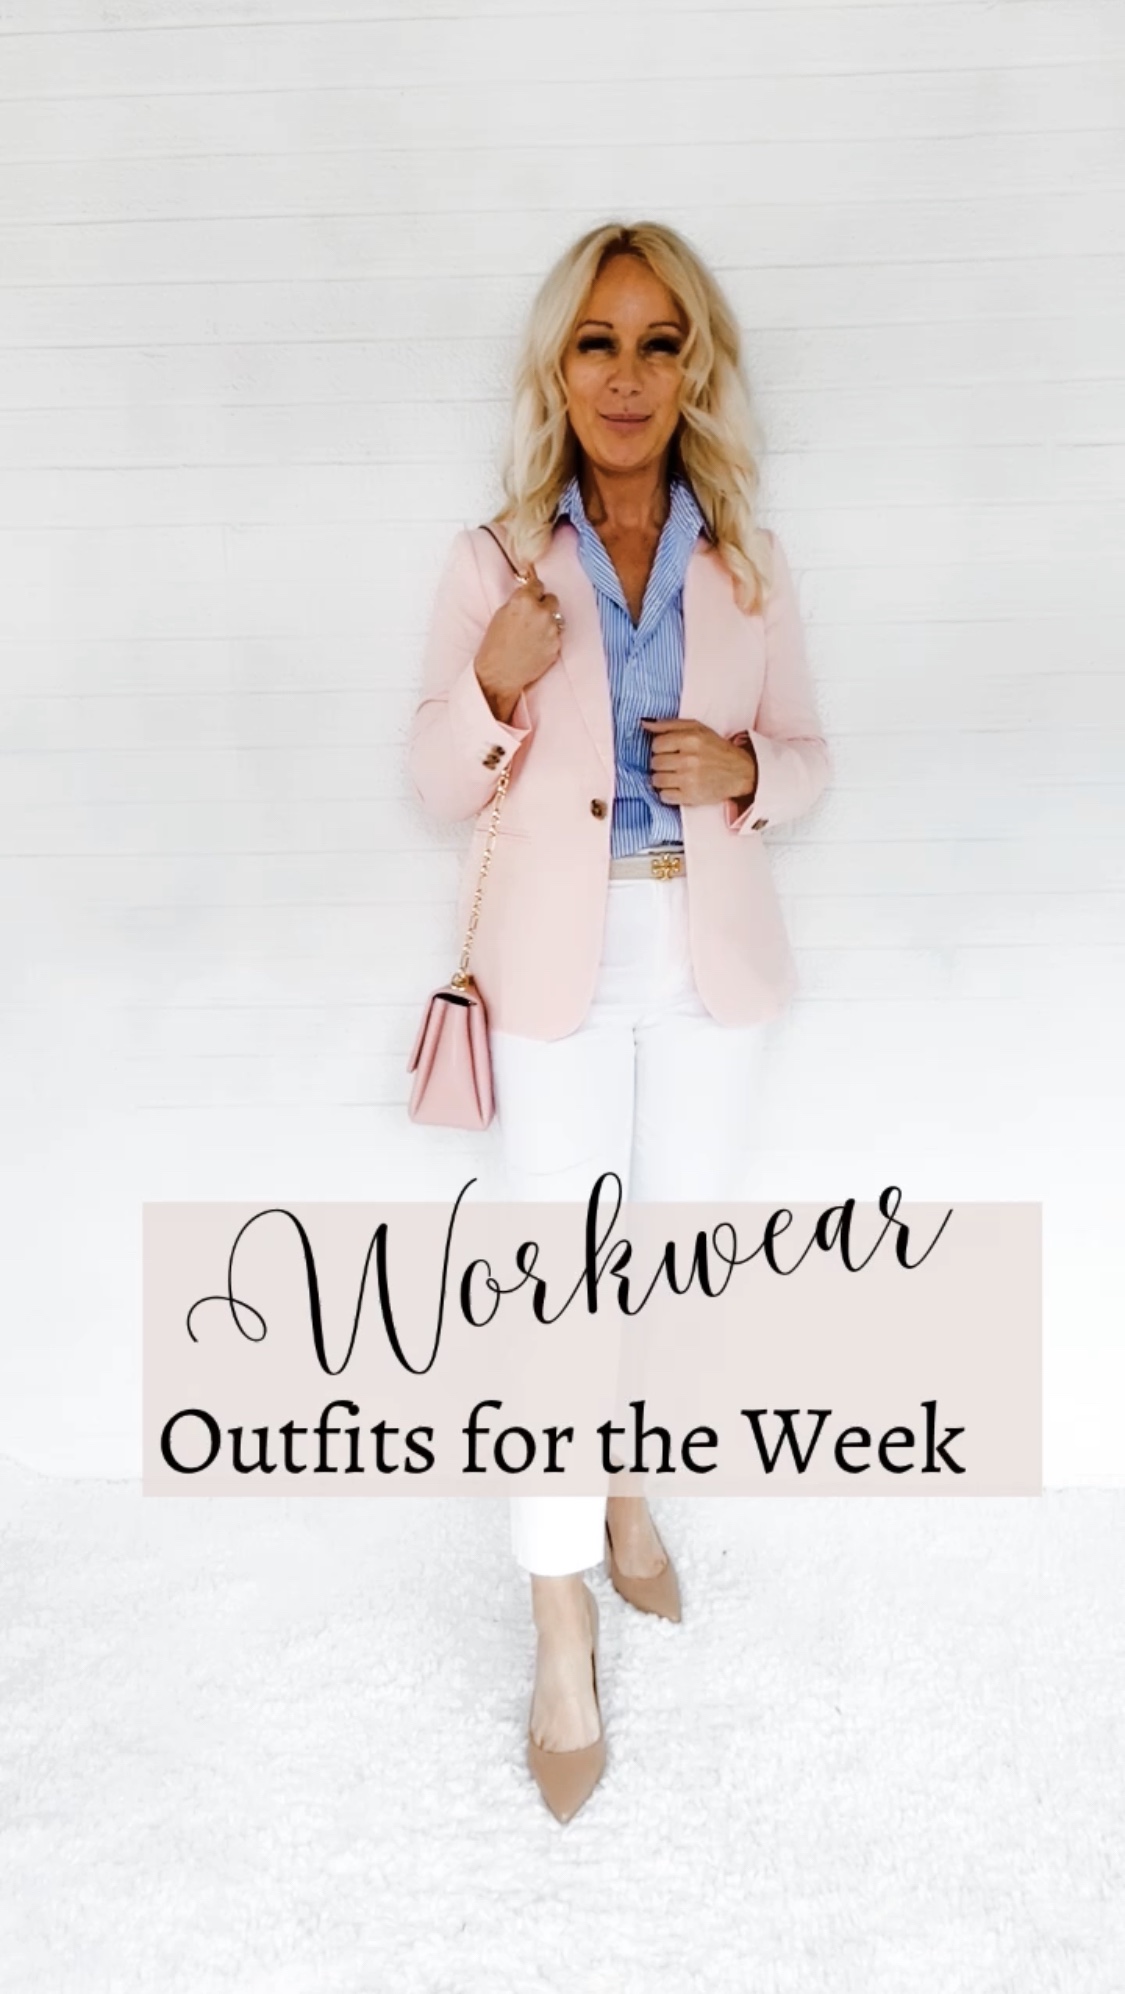 Work Outfits for the Week - Midlife Posh Closet